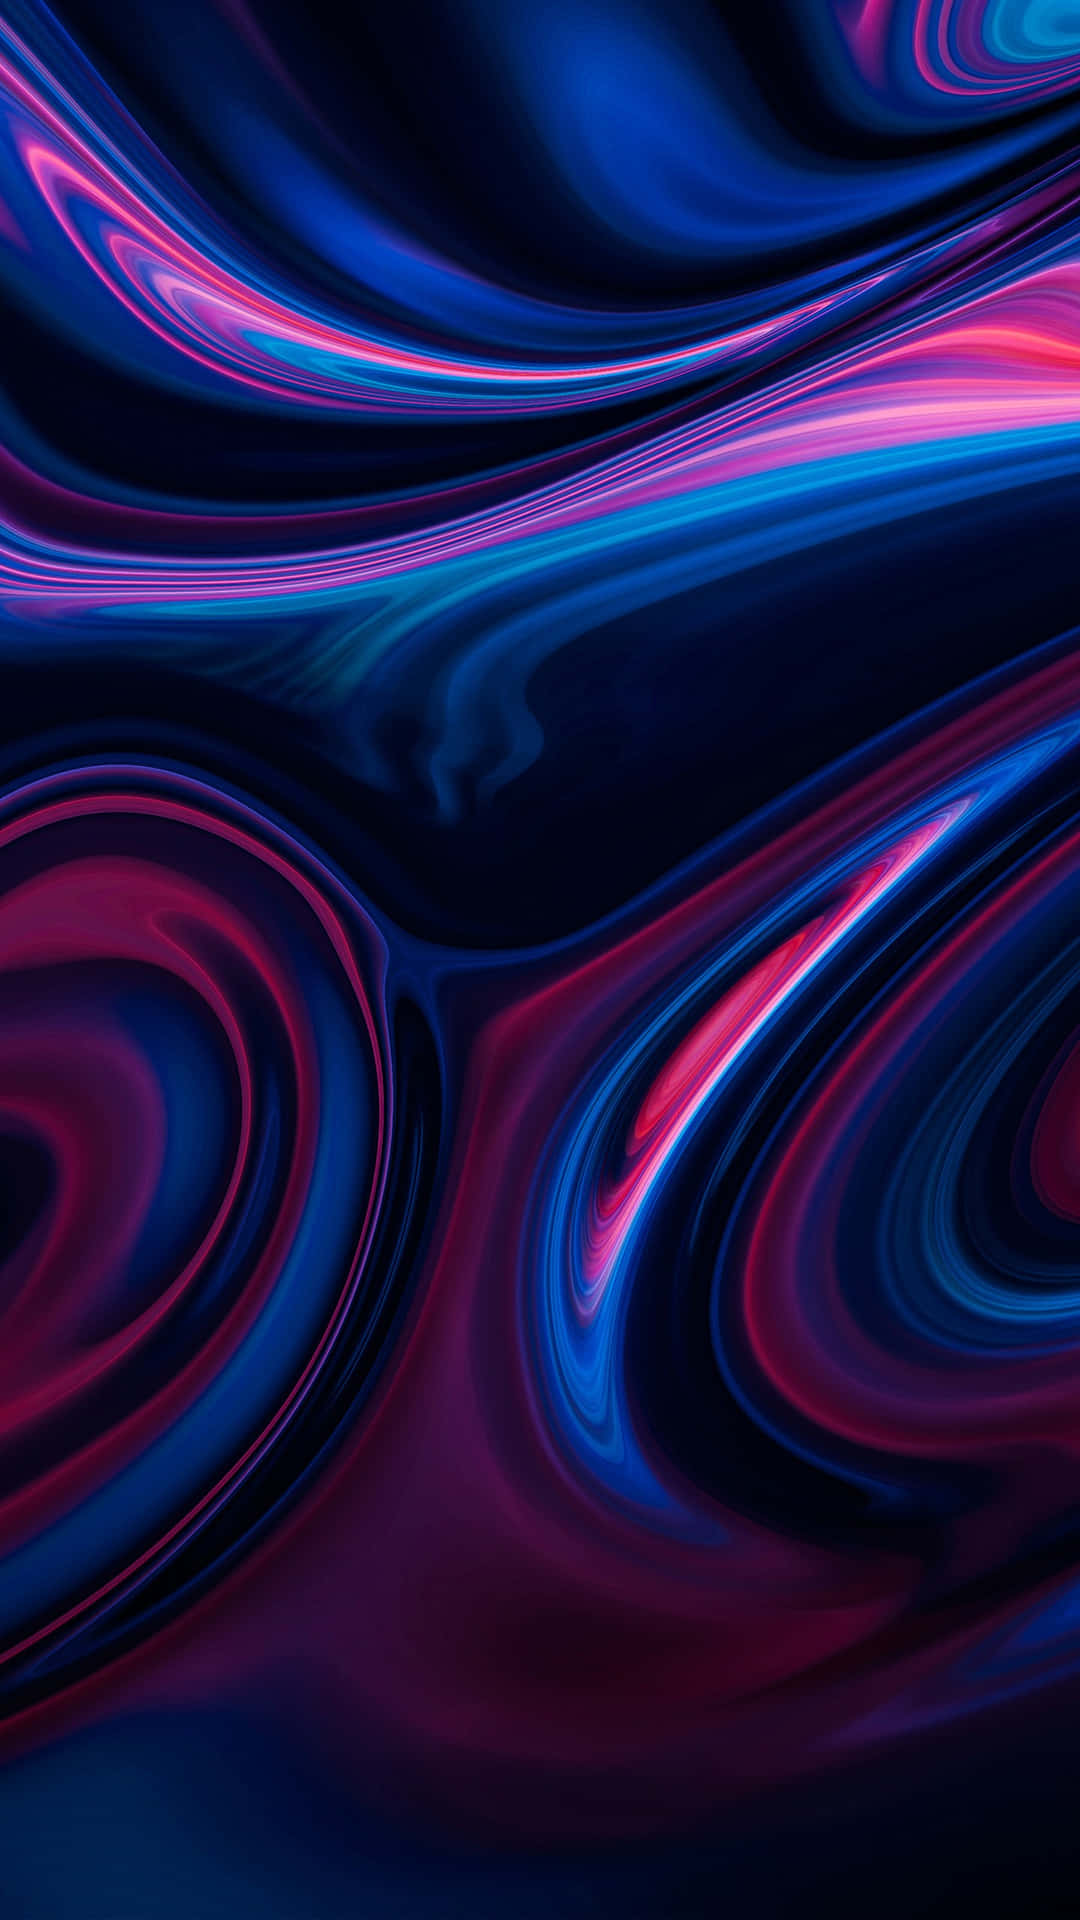 Blue And Pink Neon Swirl Patterns Background